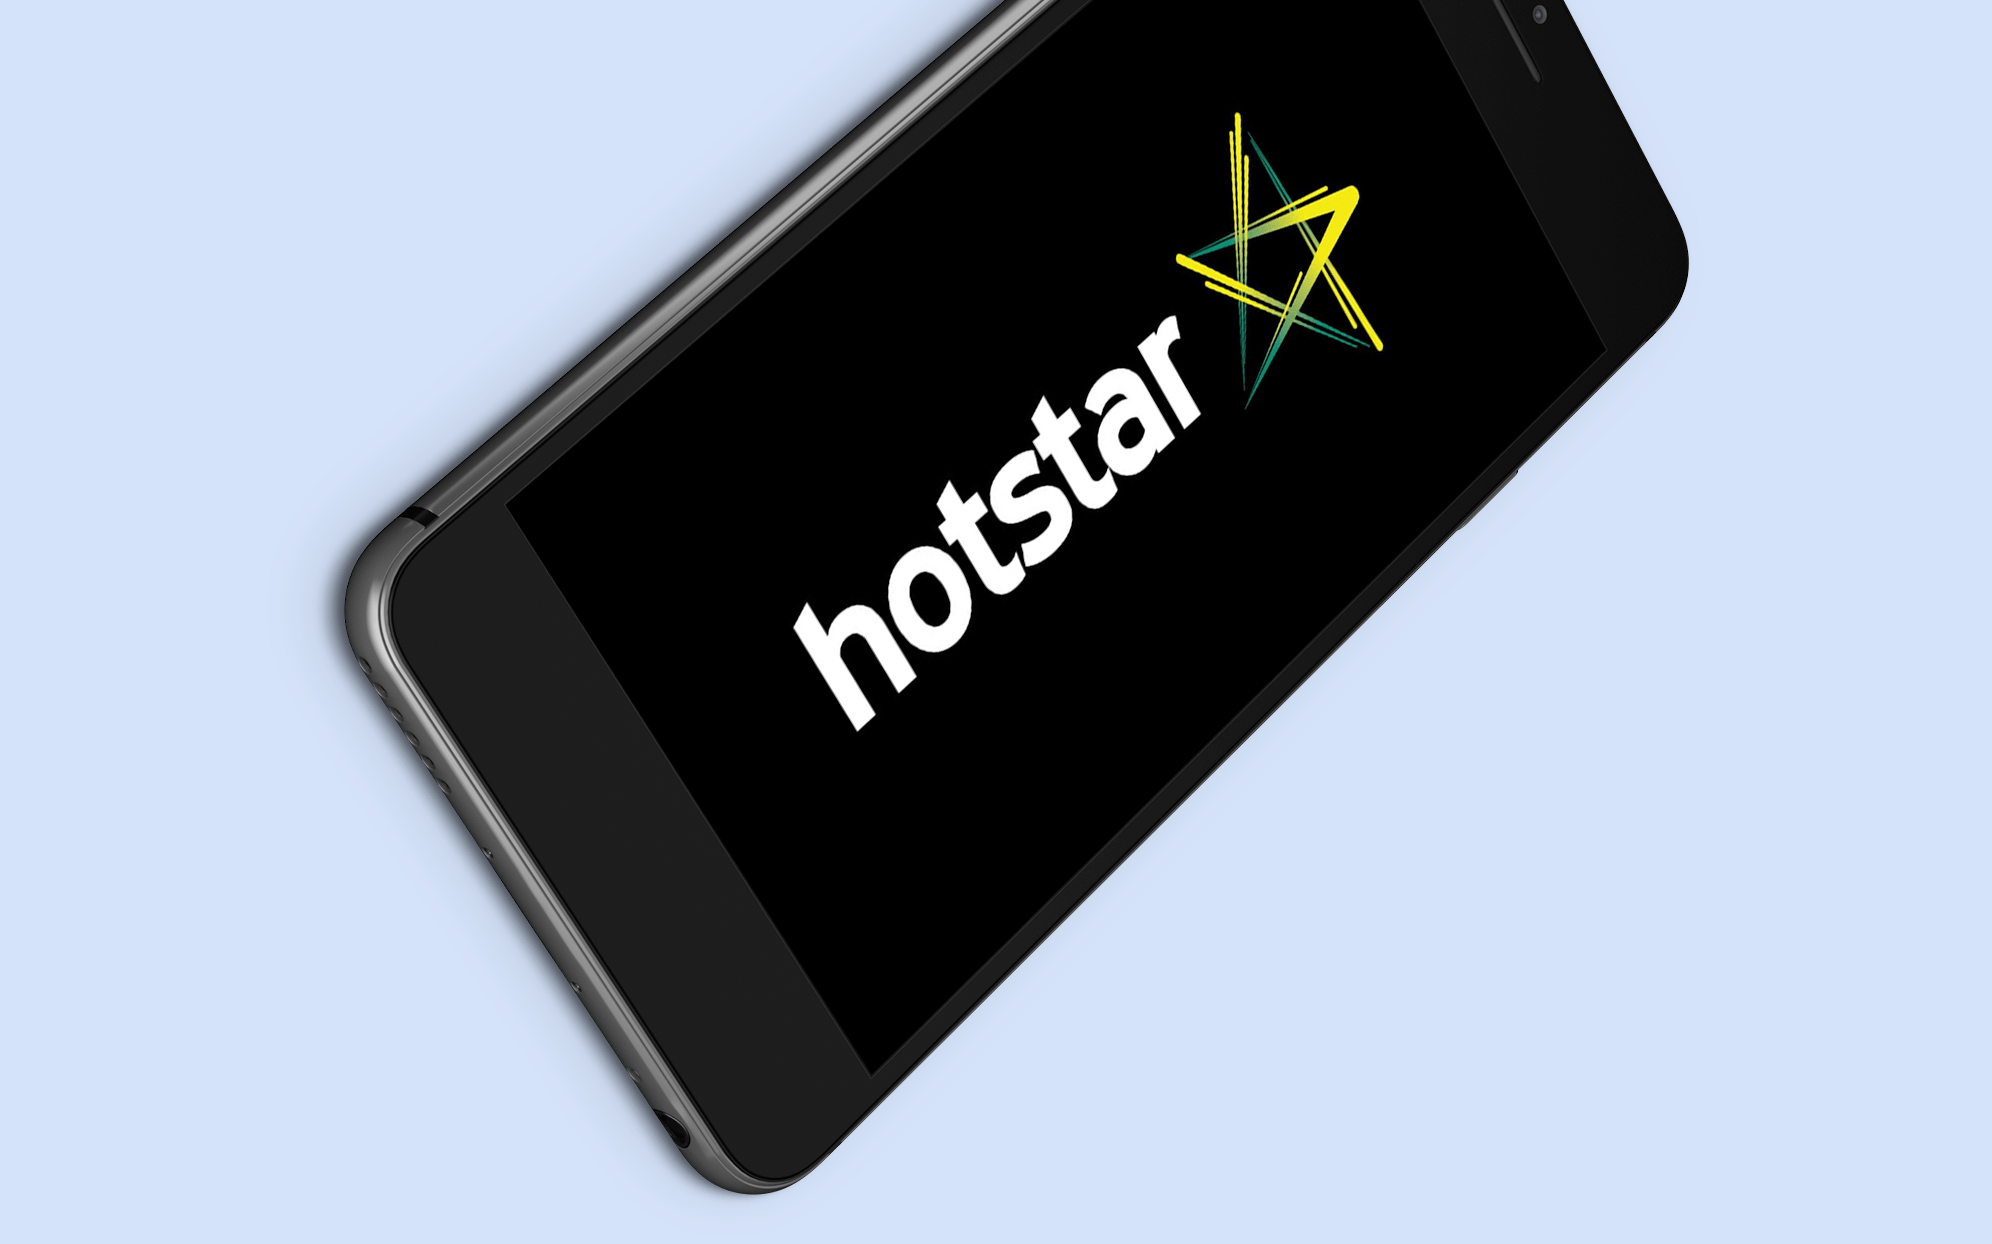 Video streaming platform Hotstar bags $153m from Star India, Star US